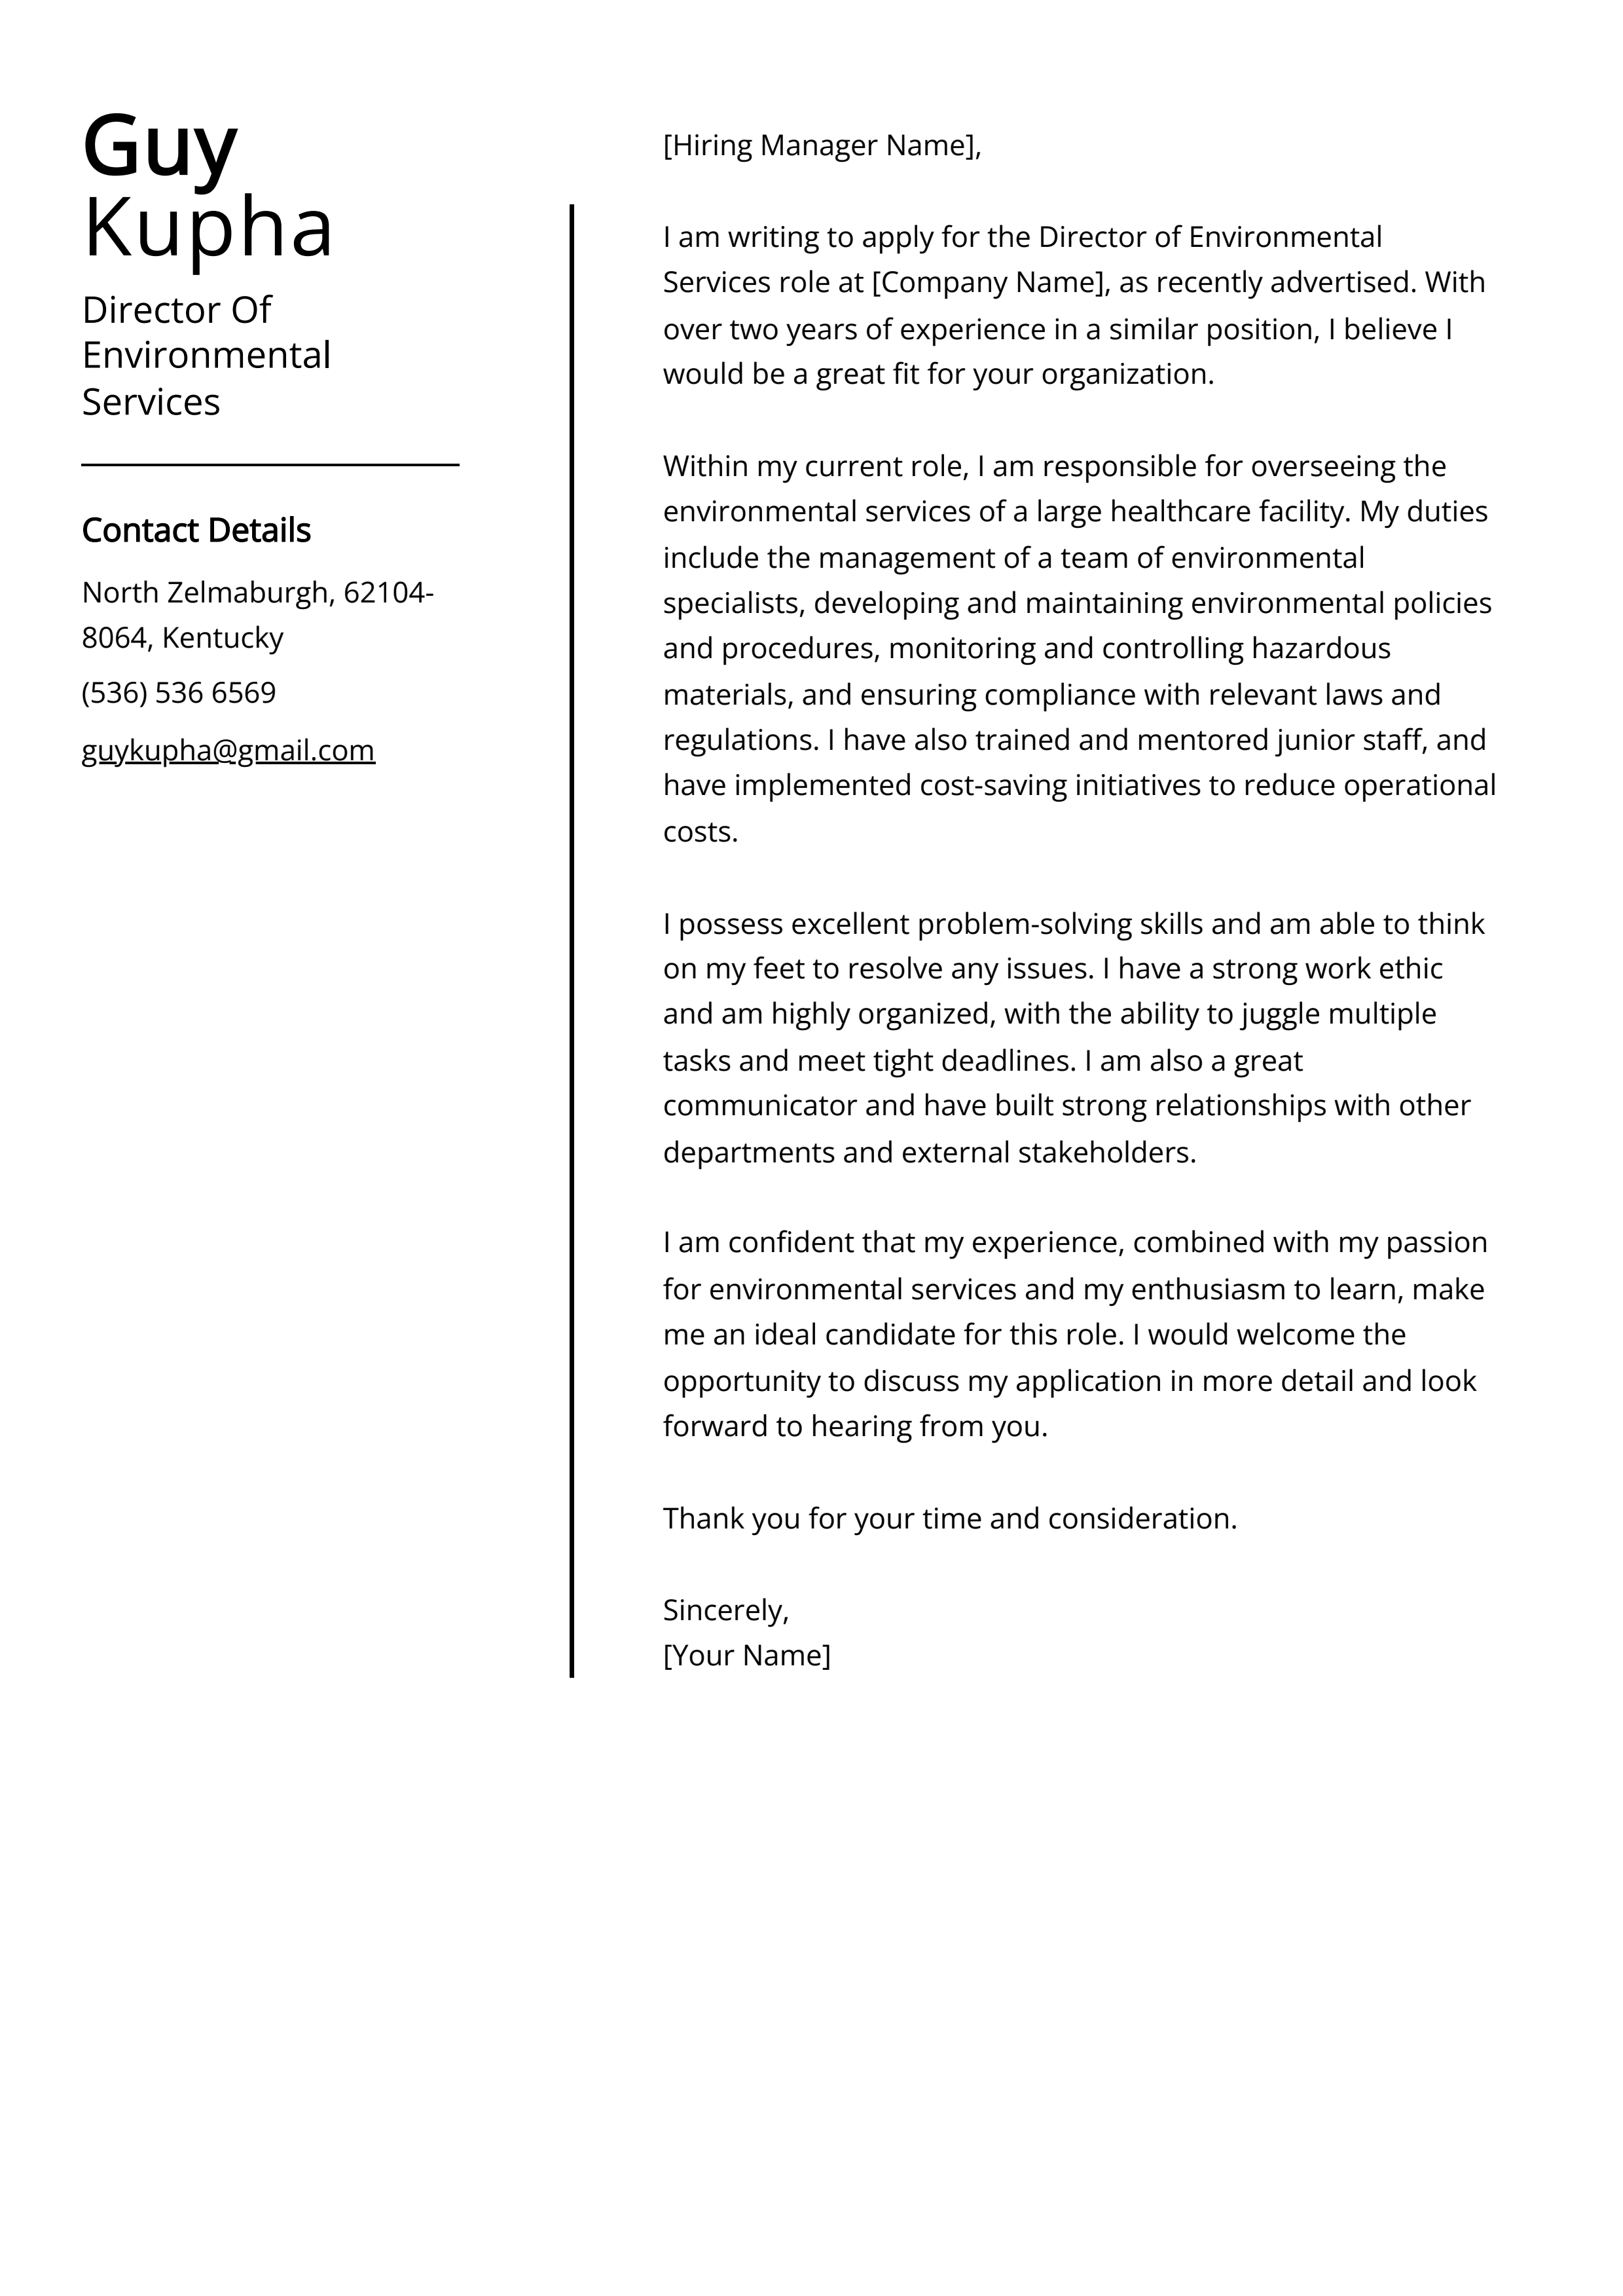 Director Of Environmental Services Cover Letter Example